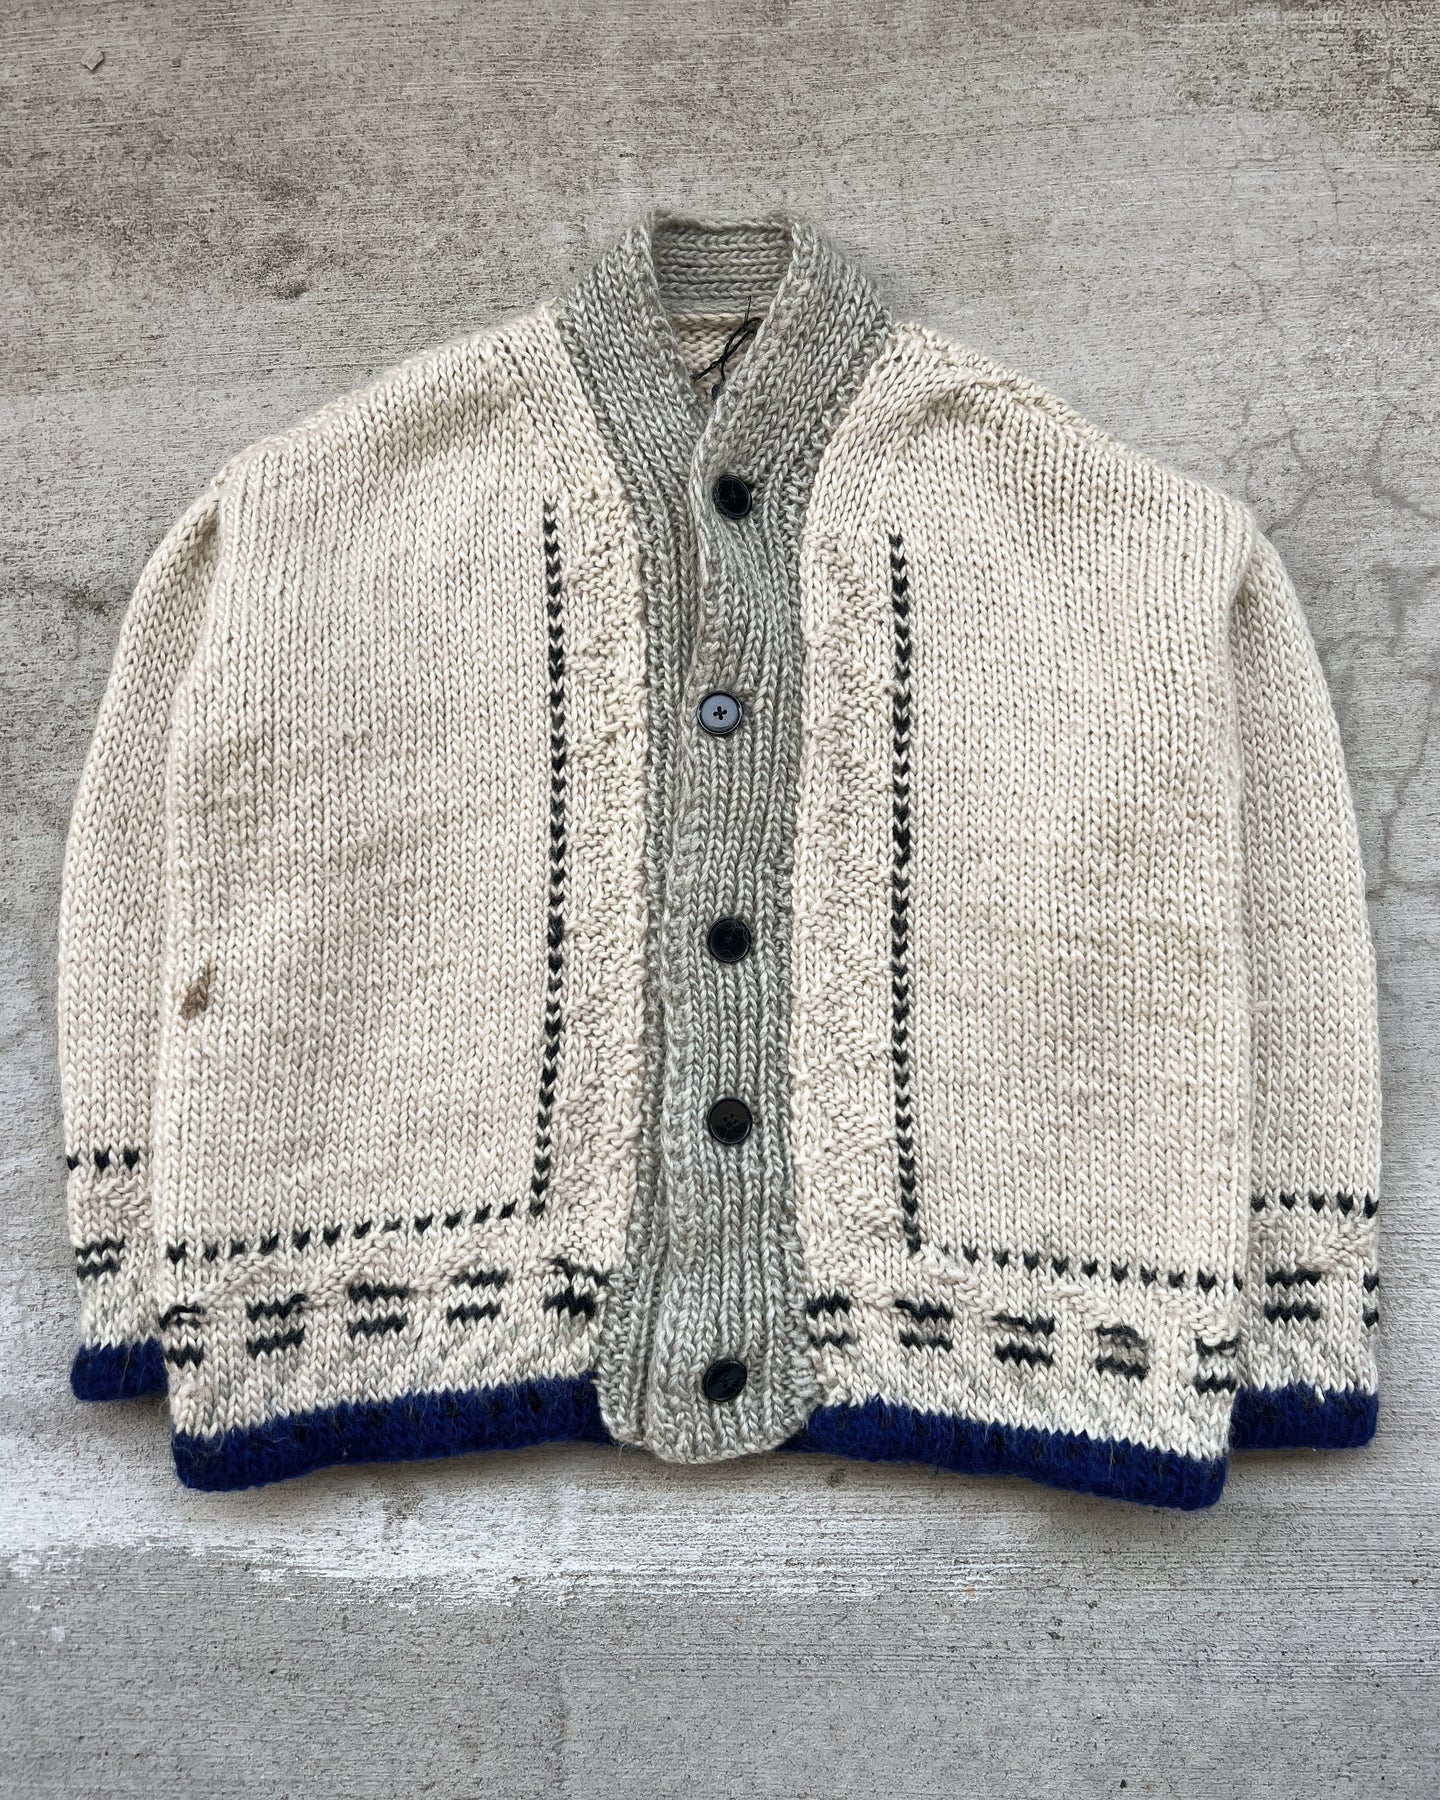 1970s Wool Knit Cowichan Button Down Sweater Cardigan - Size X-Large